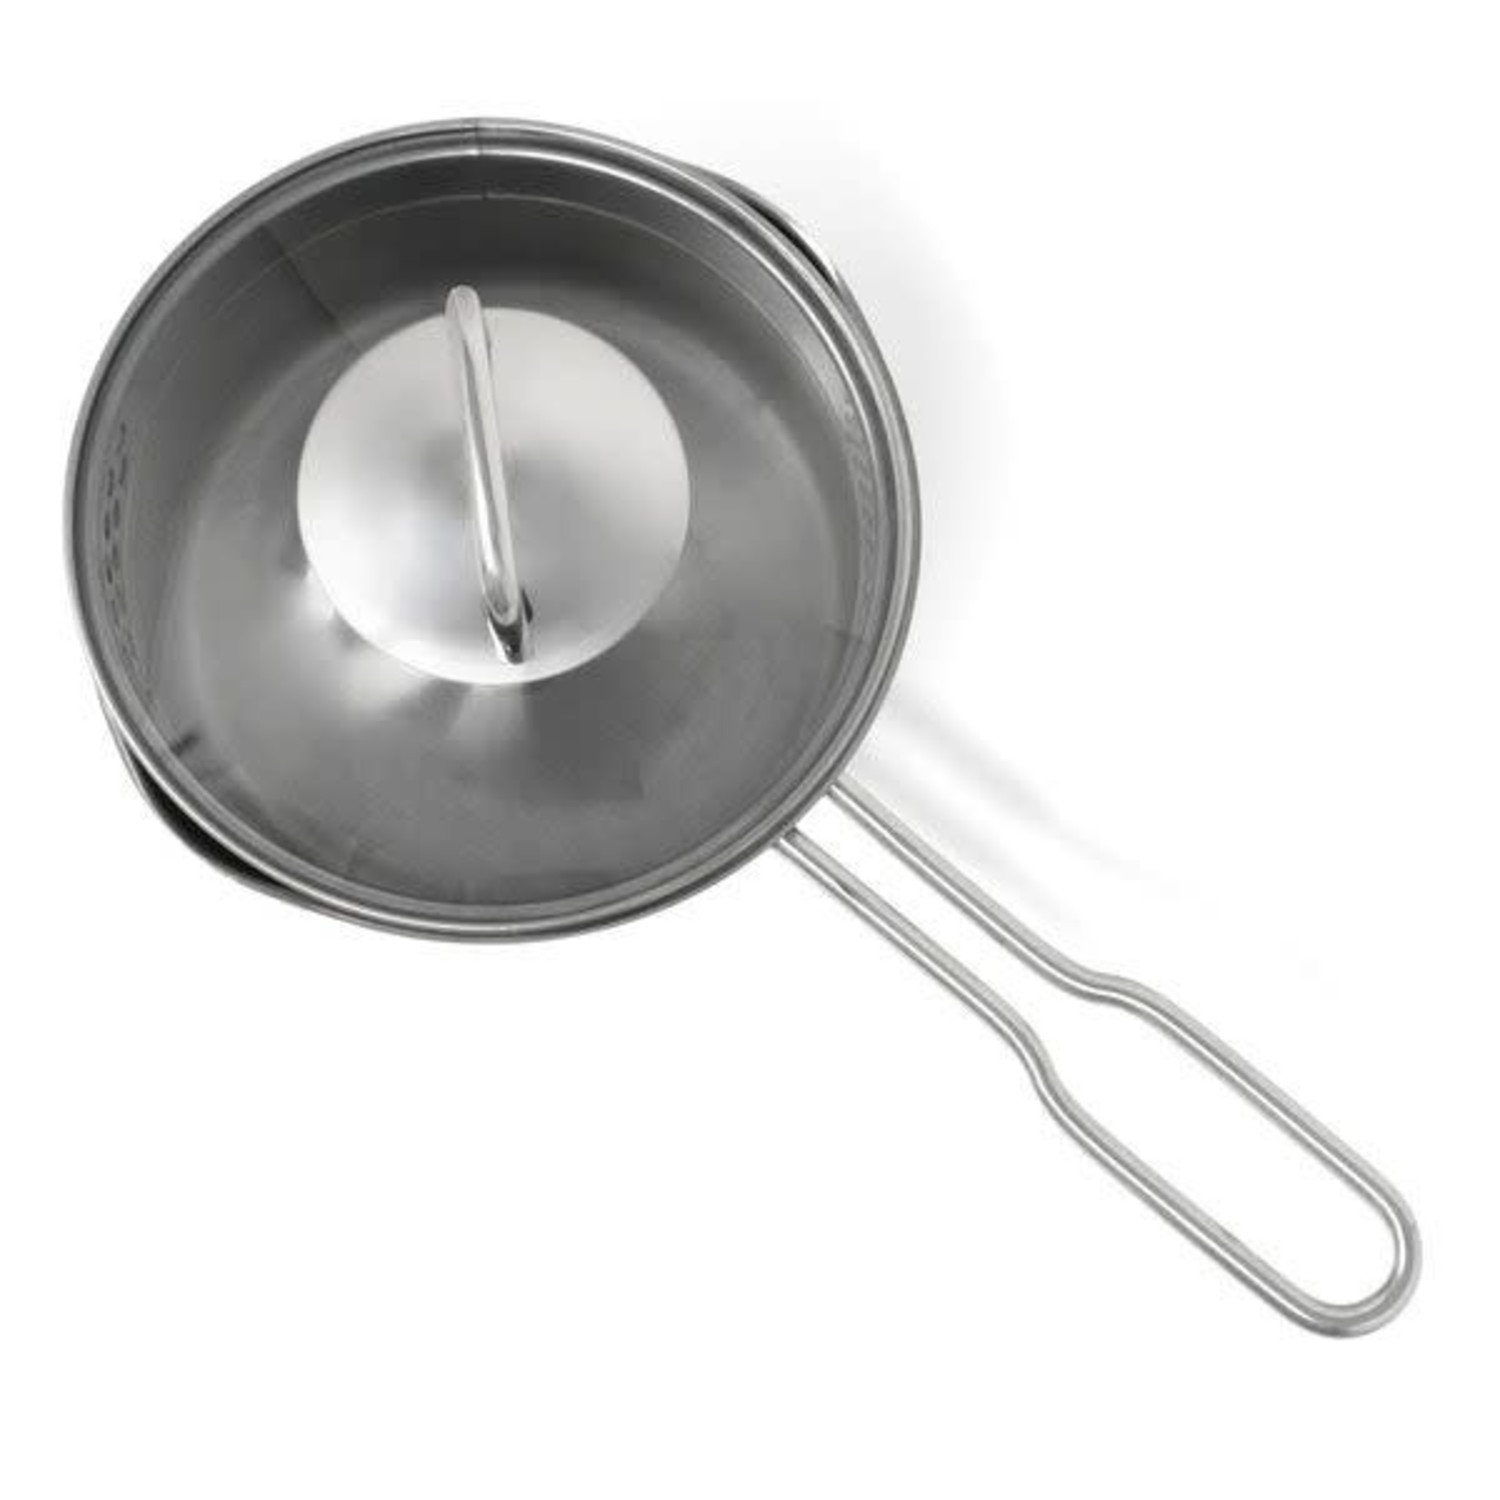 1.5 quart Sauce Pan with Straining Lid - Whisk